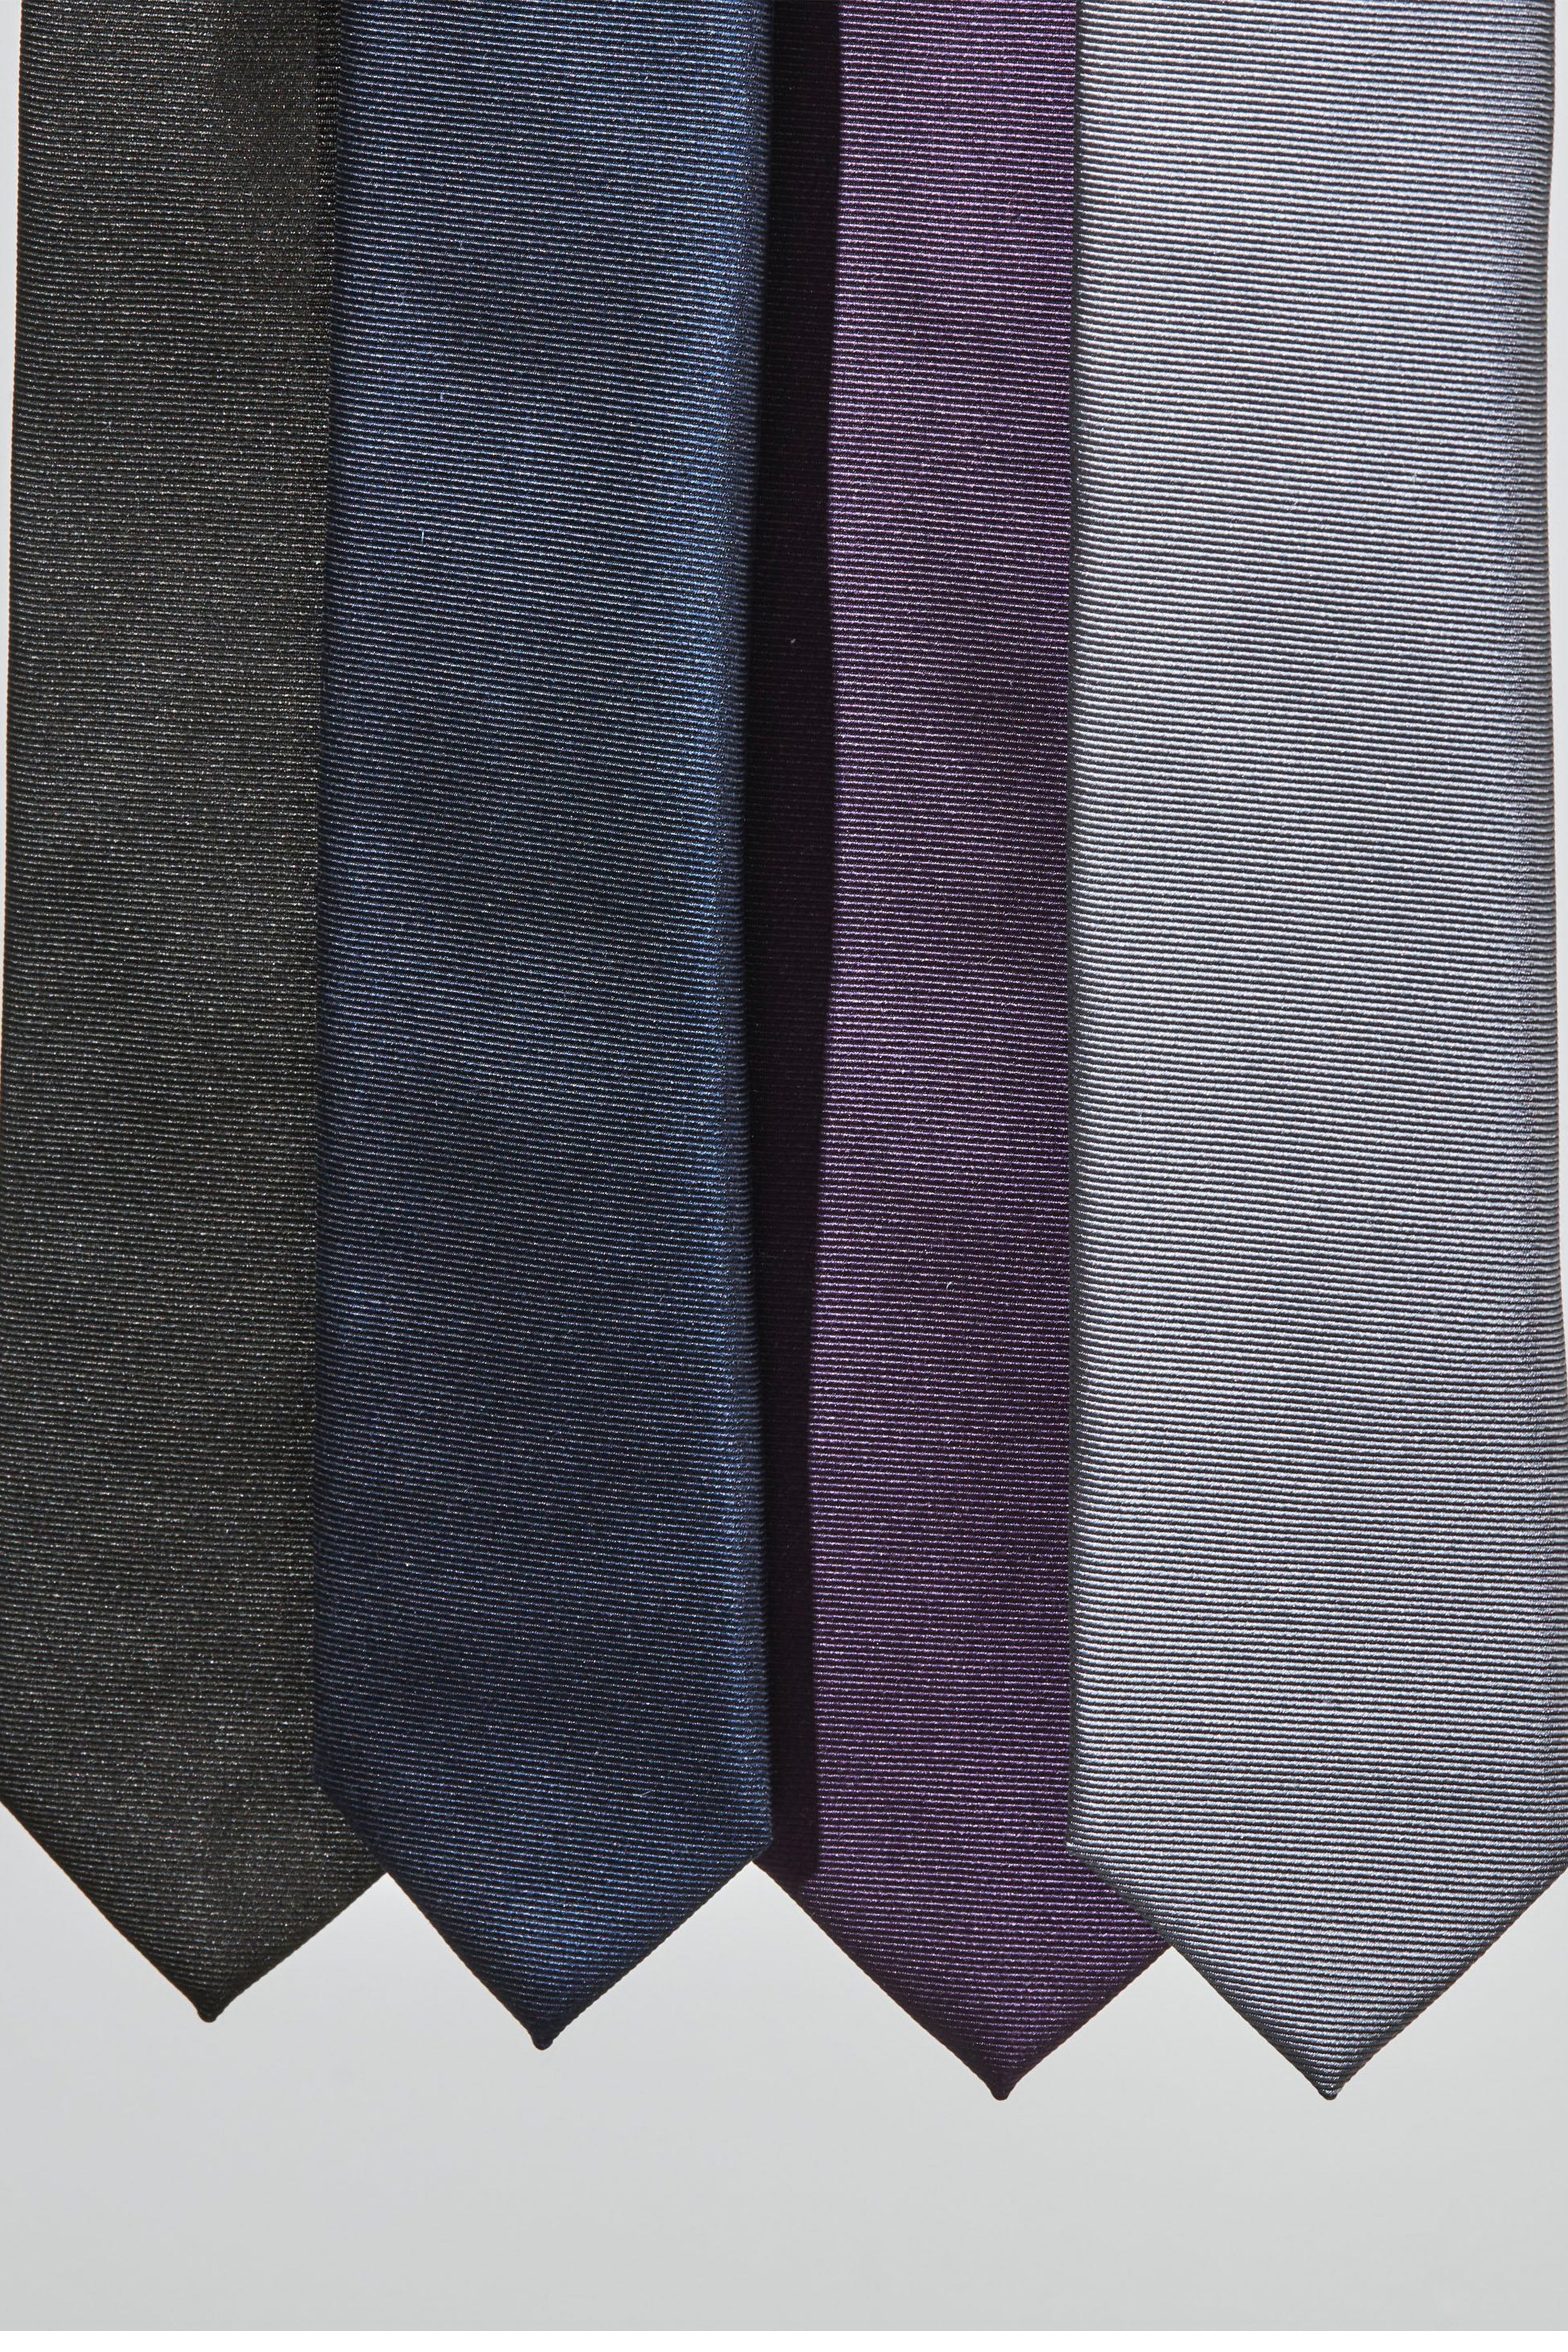 LITTLEBIG(リトルビッグ)のNarrow Tie Black or Navy or Grayの通販